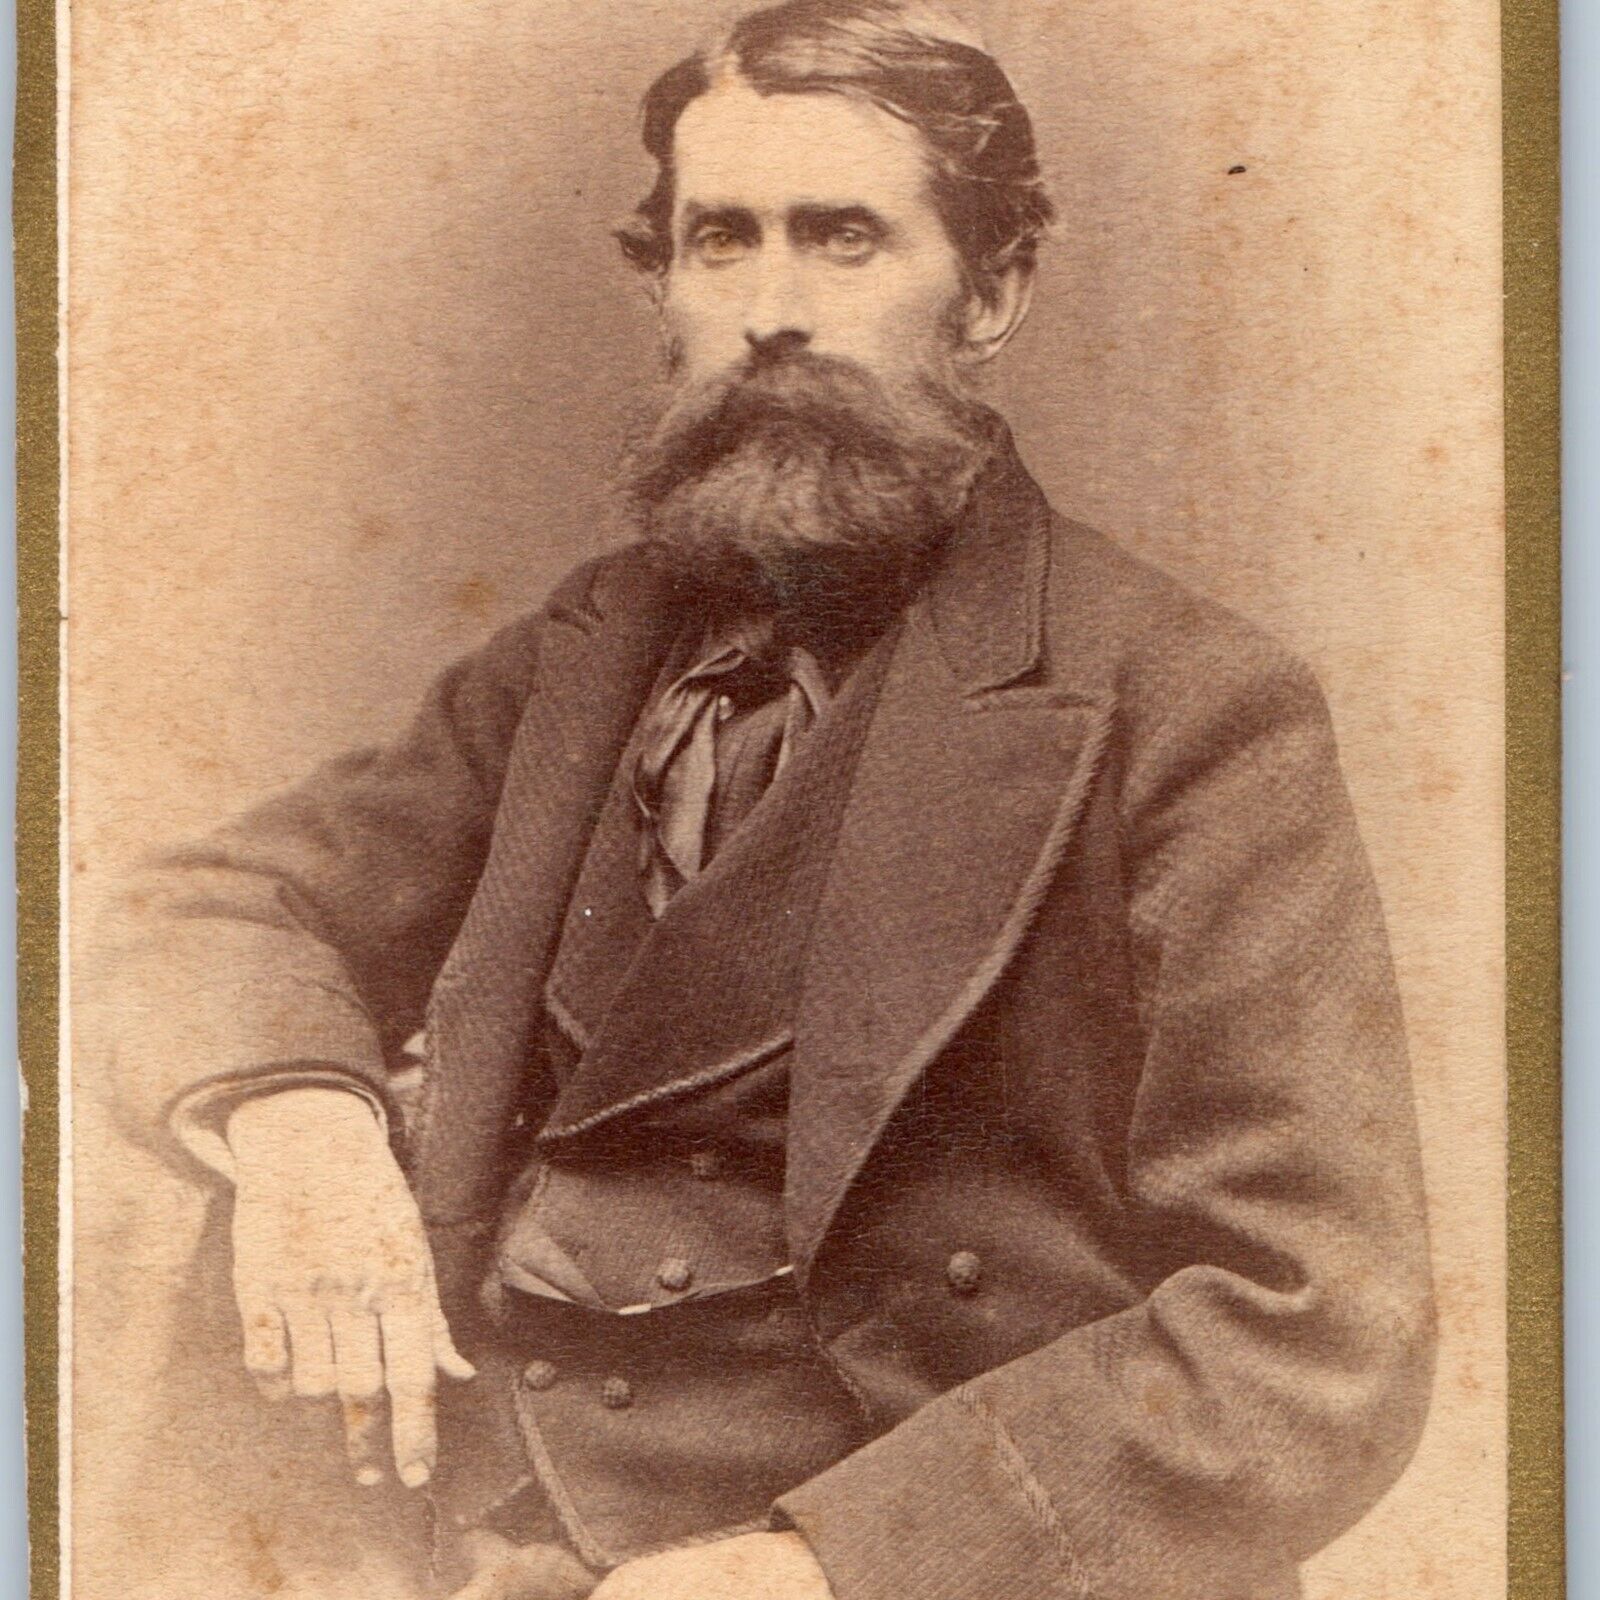 ID'd c1870s Chicago IL Large Beard Young Man Denslow CDV Photo James Peabody H39